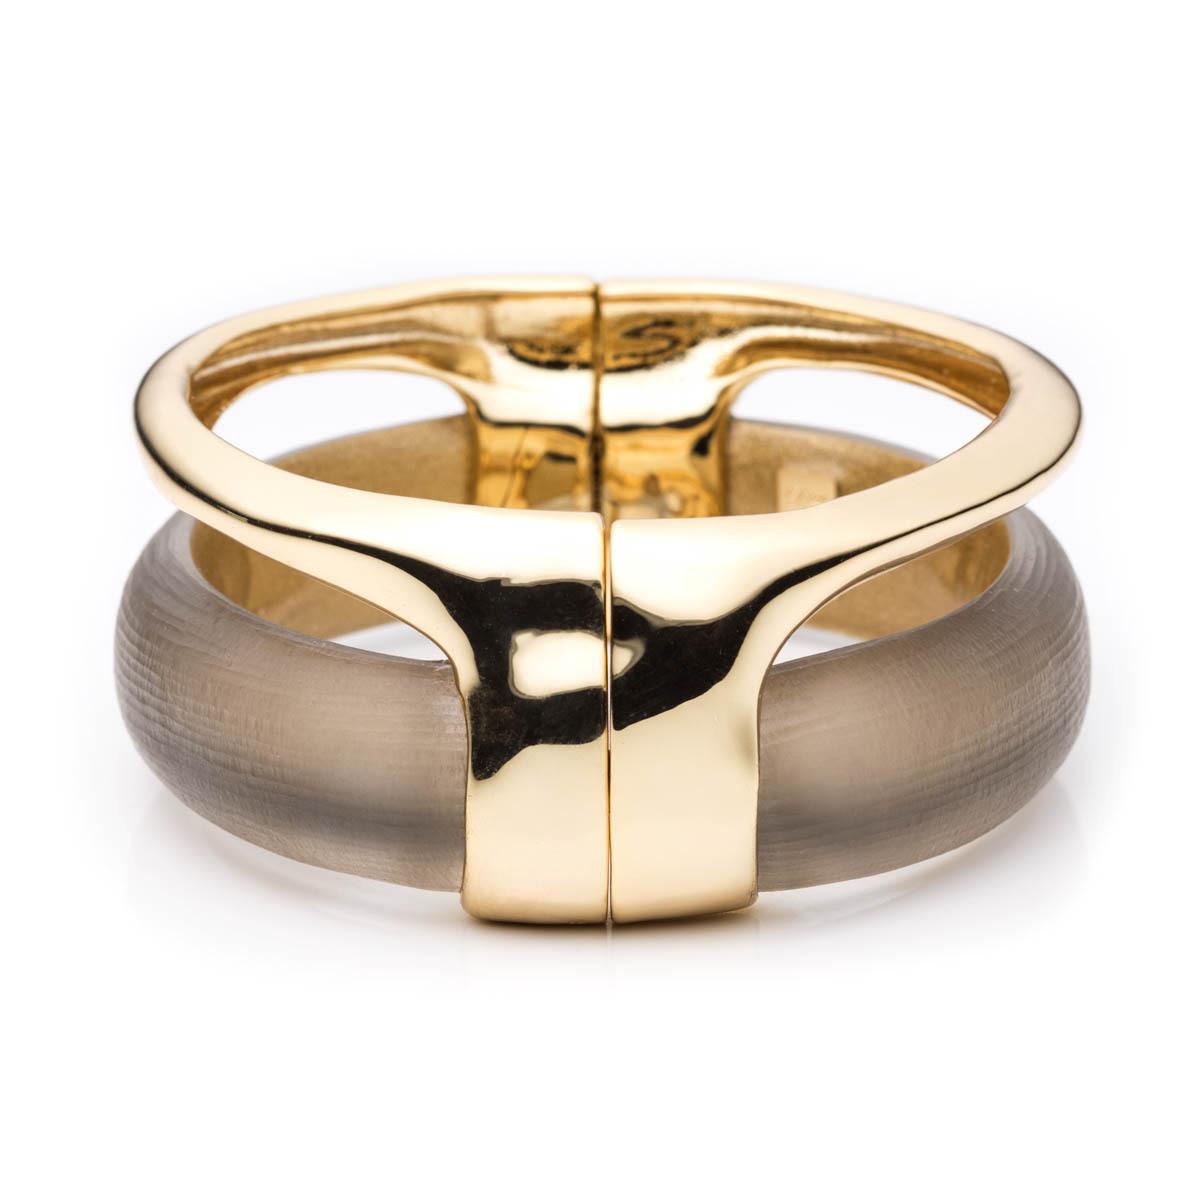 Lyst - Alexis Bittar Gold Stacked Hinged Bracelet You Might Also Like